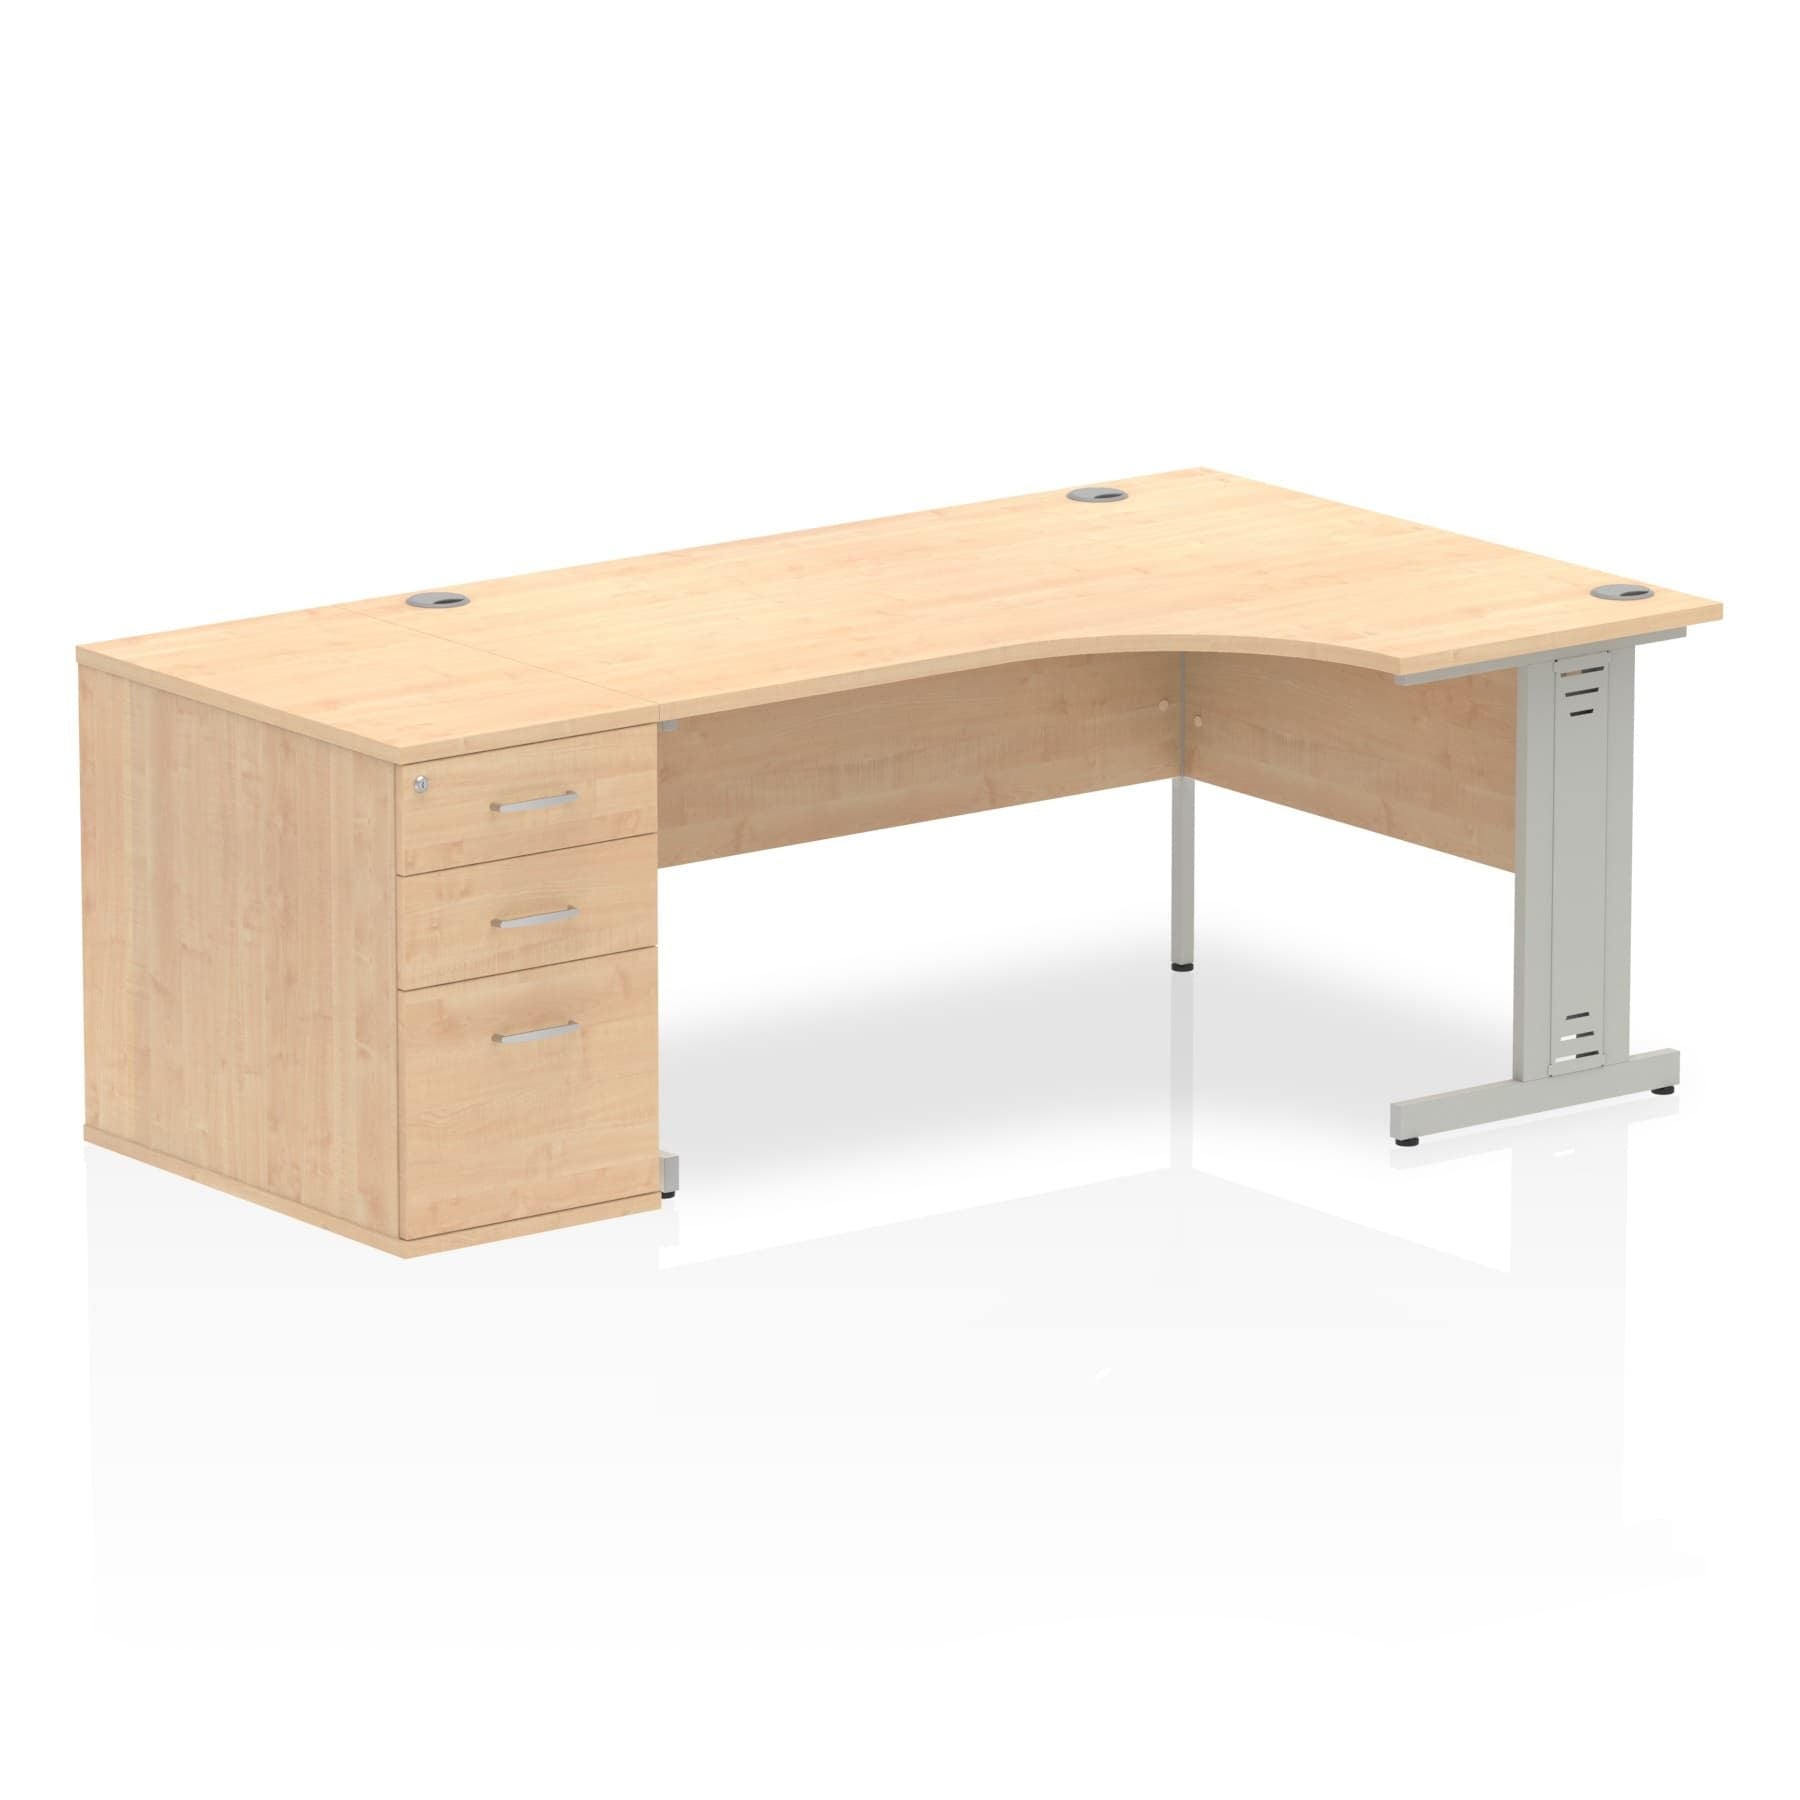 Sturdy Dynasty Freestanding 1600mm Right Crescent Desk with Cable Management and Heat-Resistant Finish